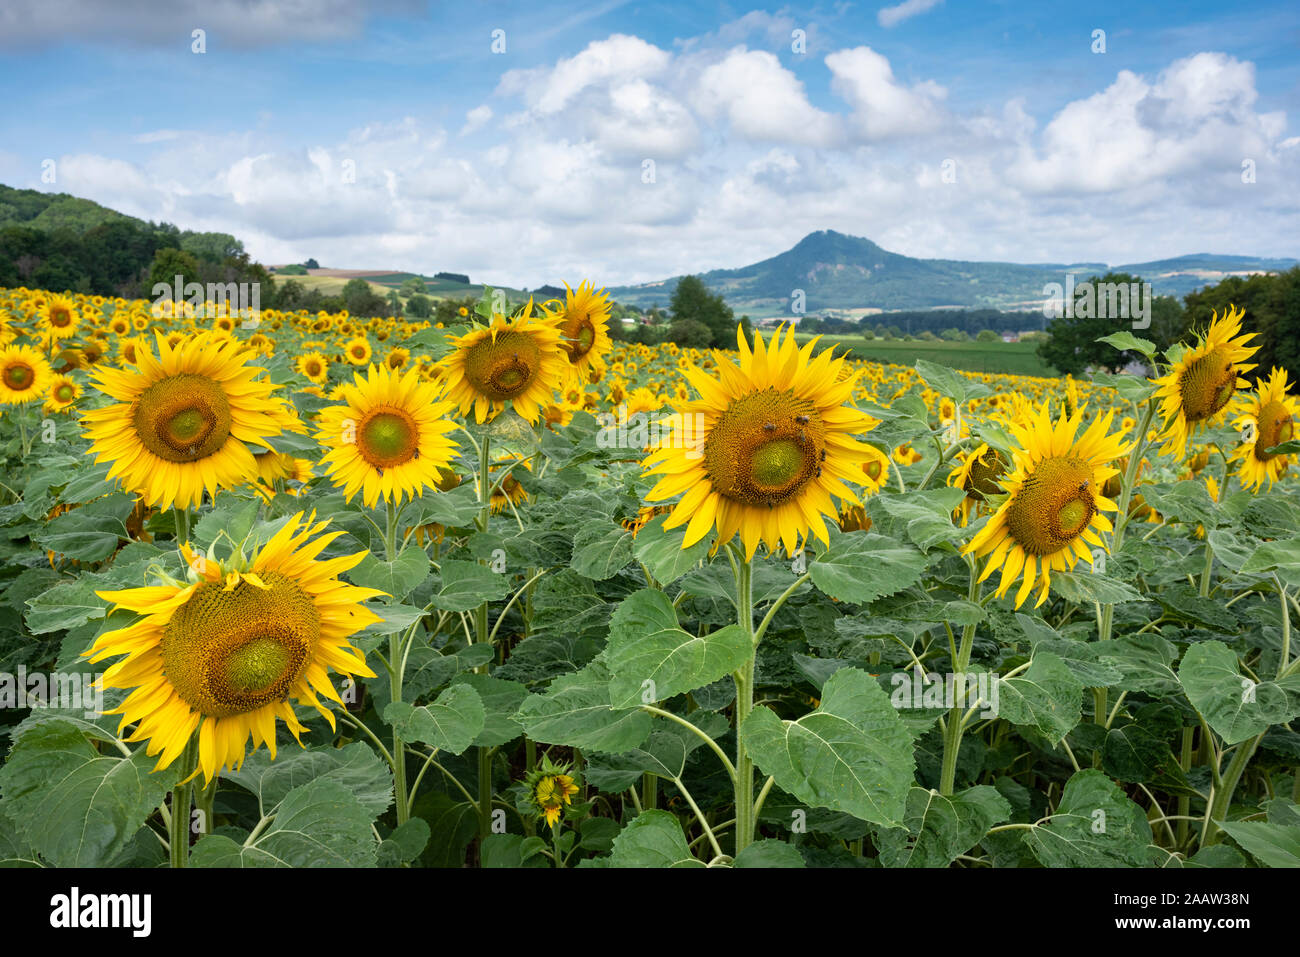 Scenic view of sunflowers growing on landscape against cloudy sky, Germany Stock Photo